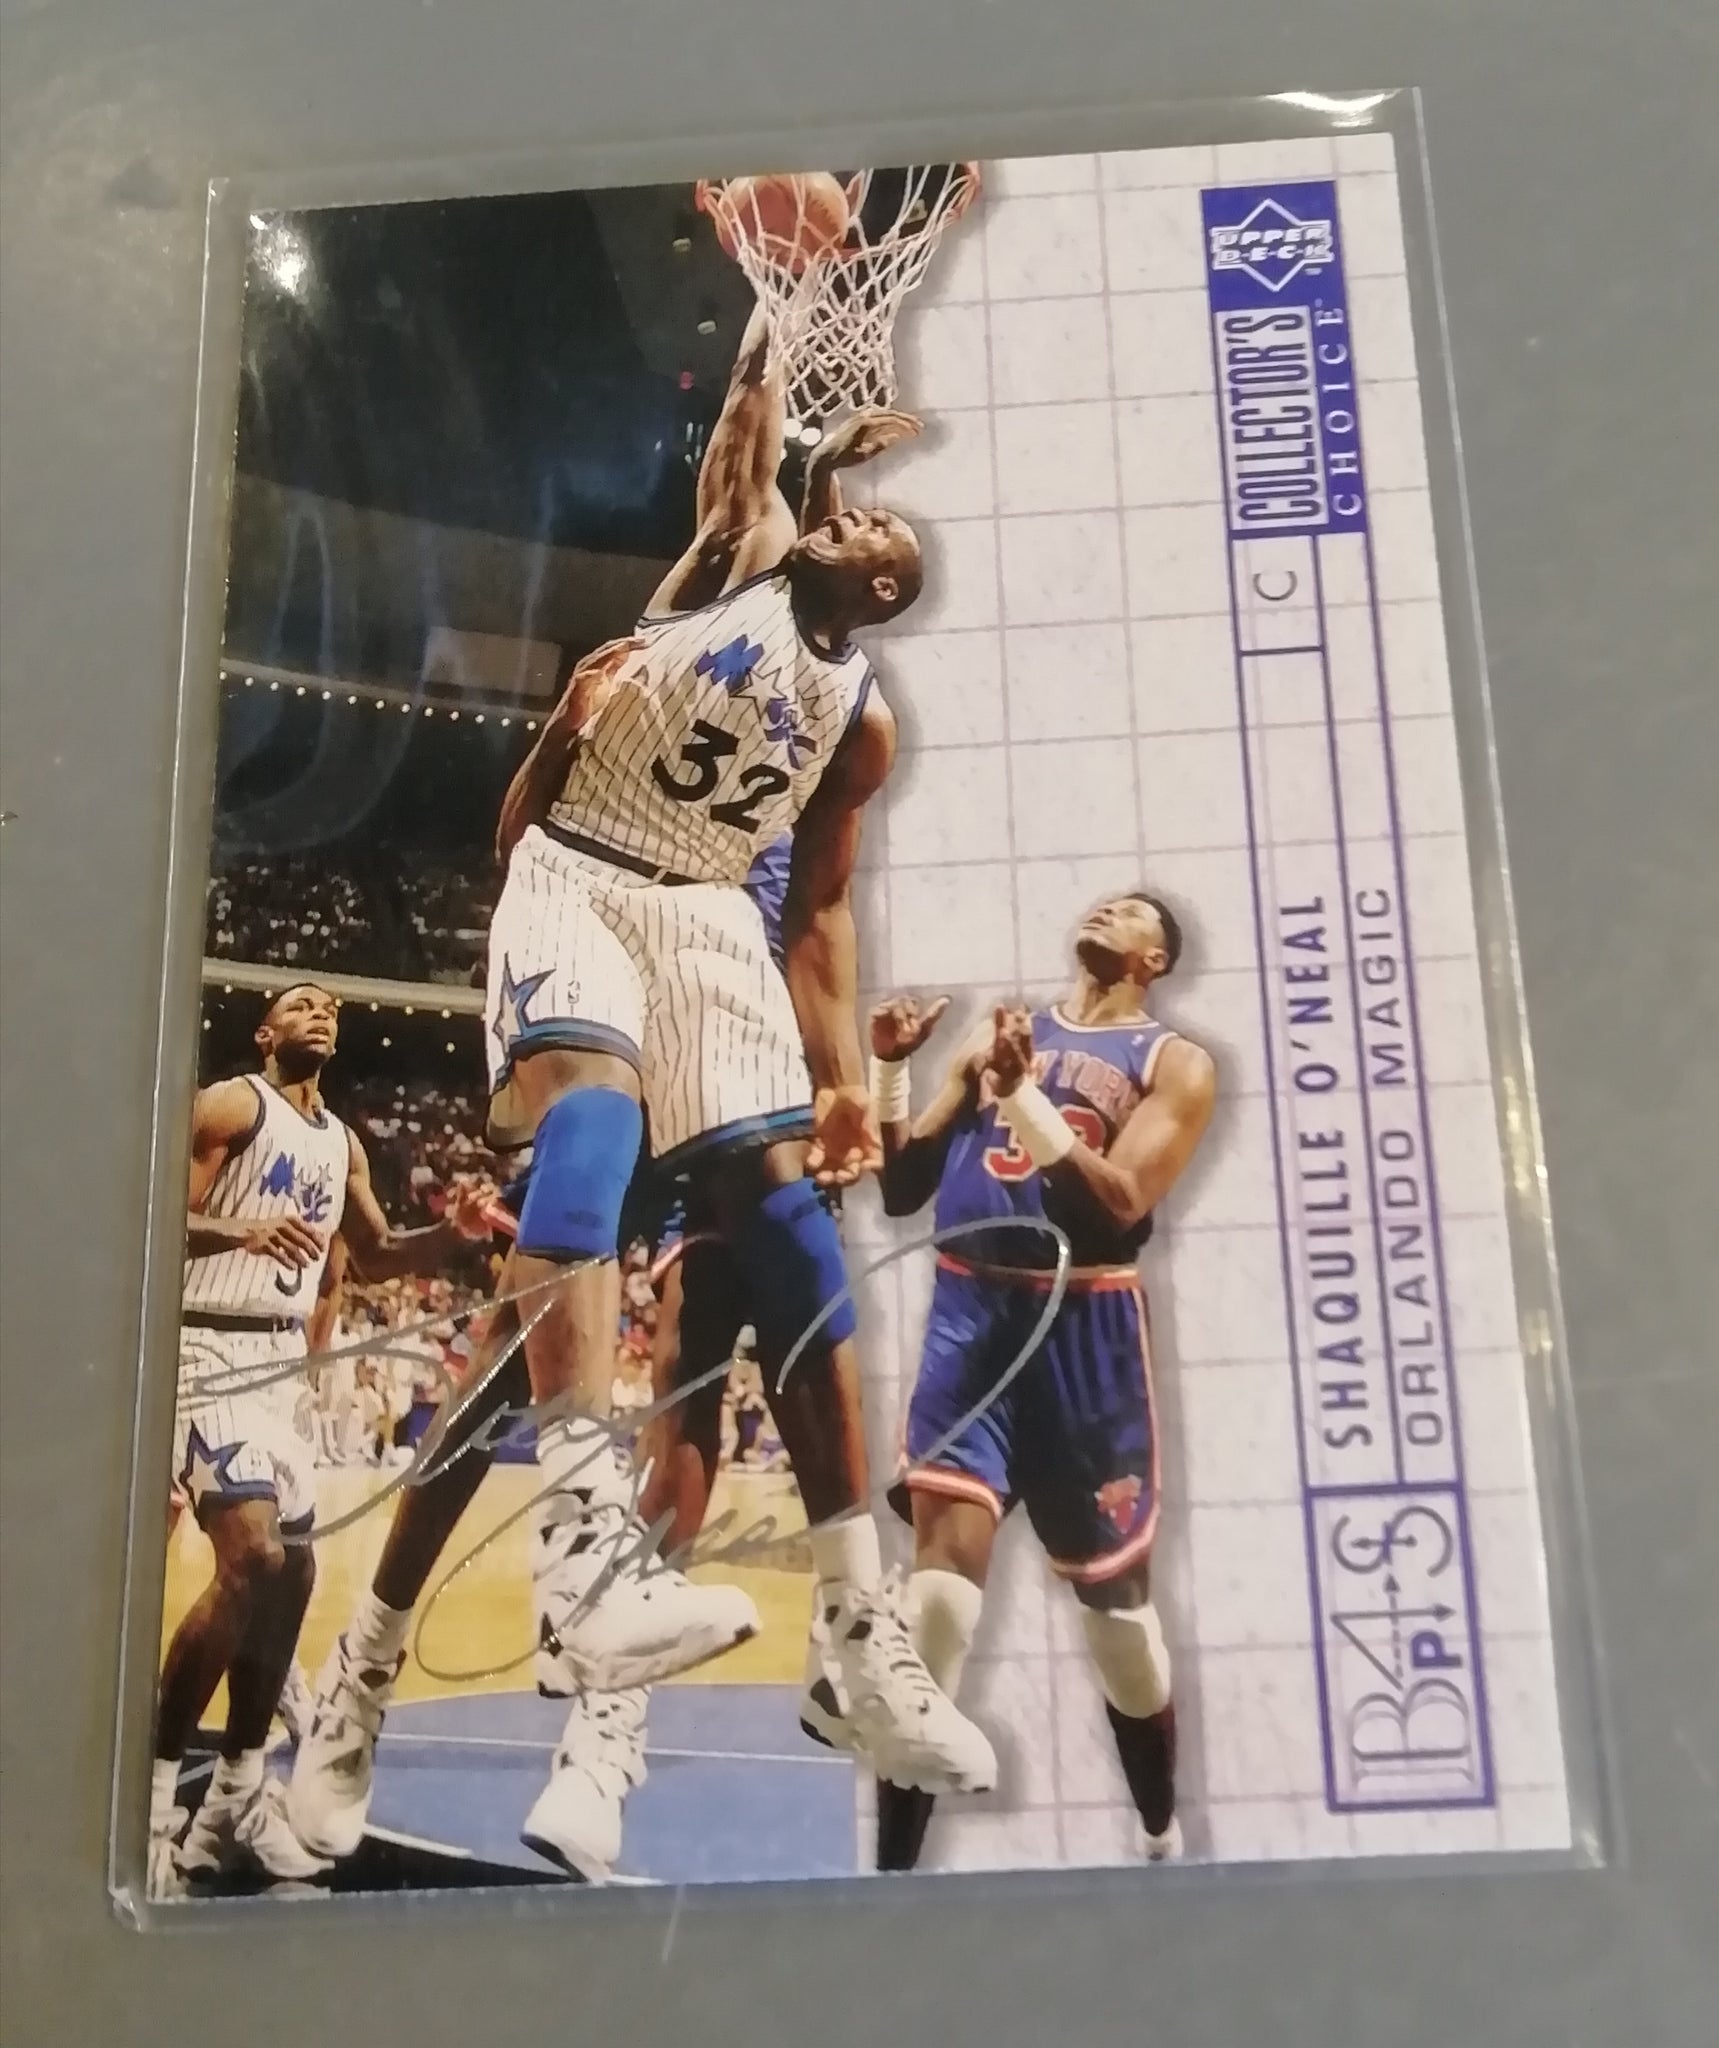 1993-94 Upper Deck Collector's Choice Shaquille O'Neal #390 Silver Signature Trading Card NM